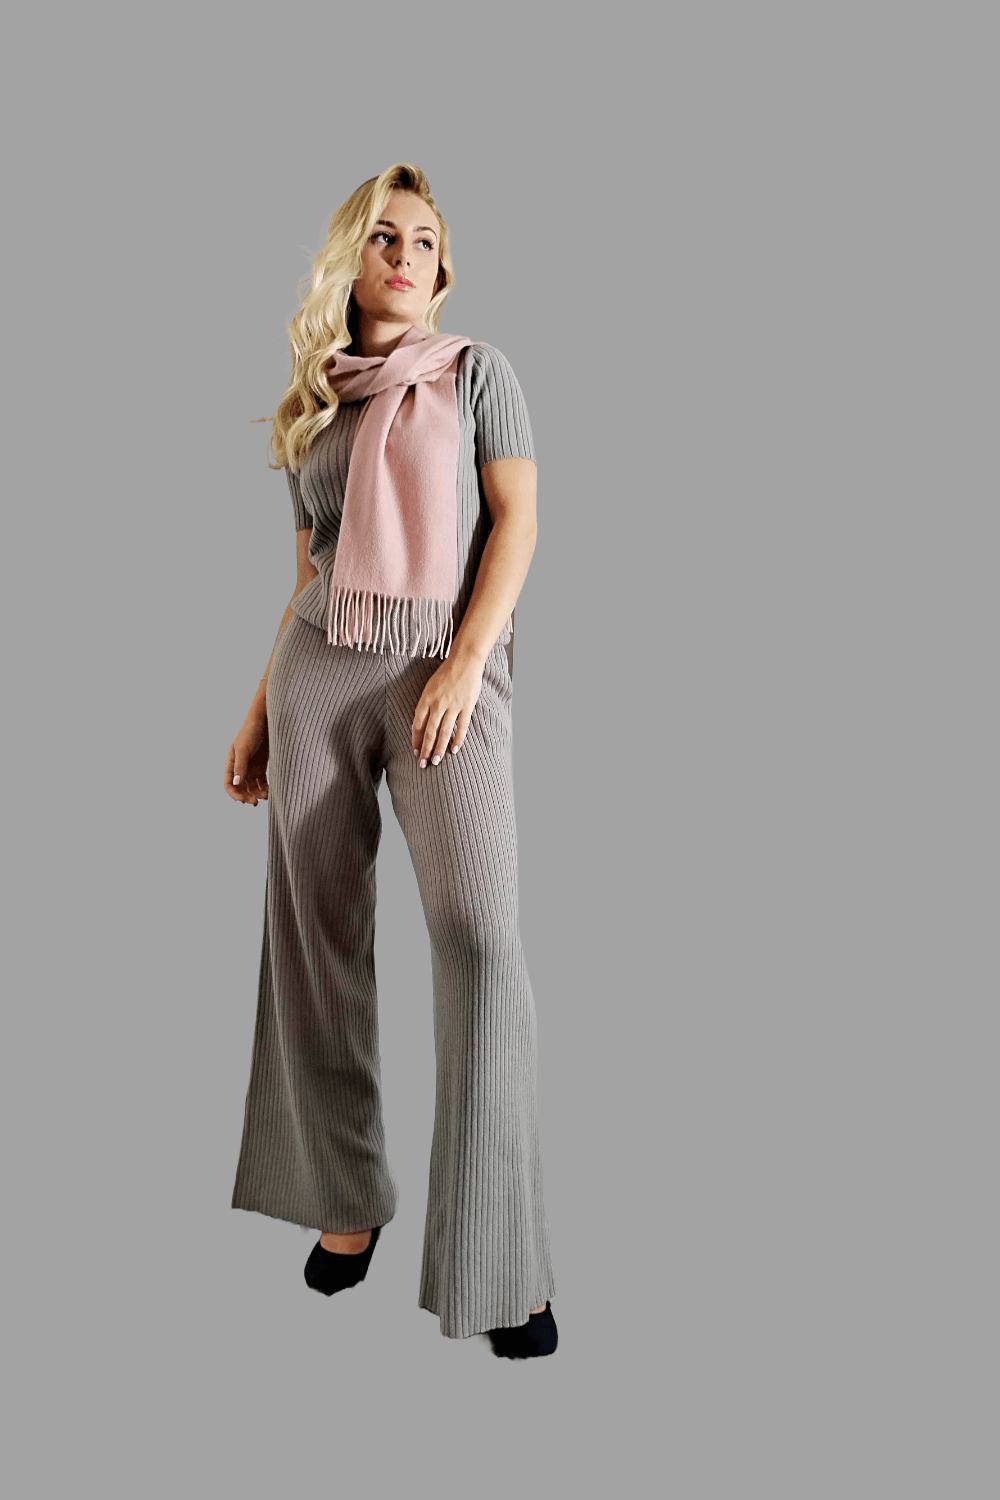 100% Cashmere Scarf in Soft Pink